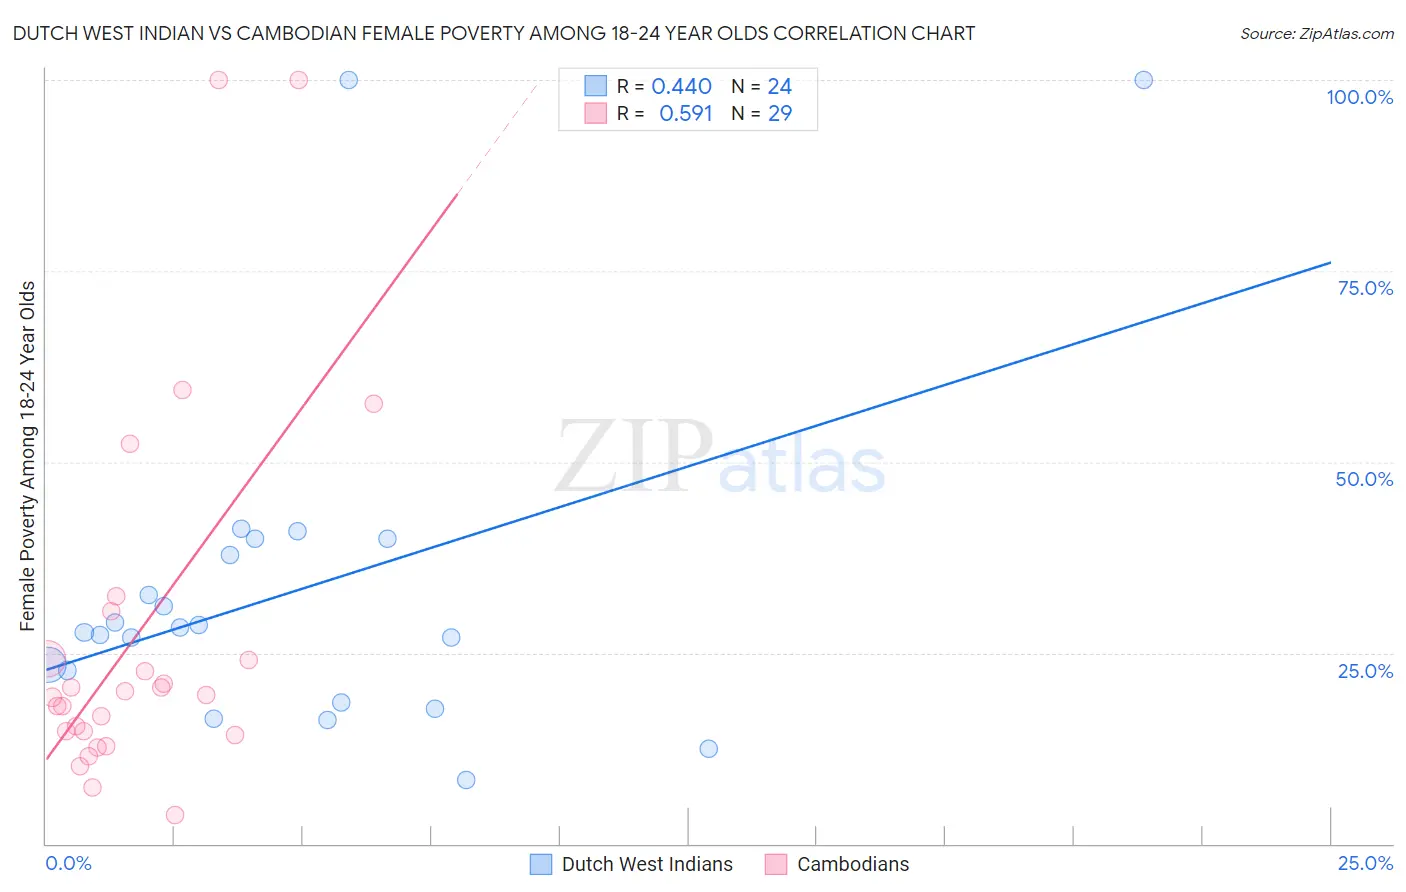 Dutch West Indian vs Cambodian Female Poverty Among 18-24 Year Olds